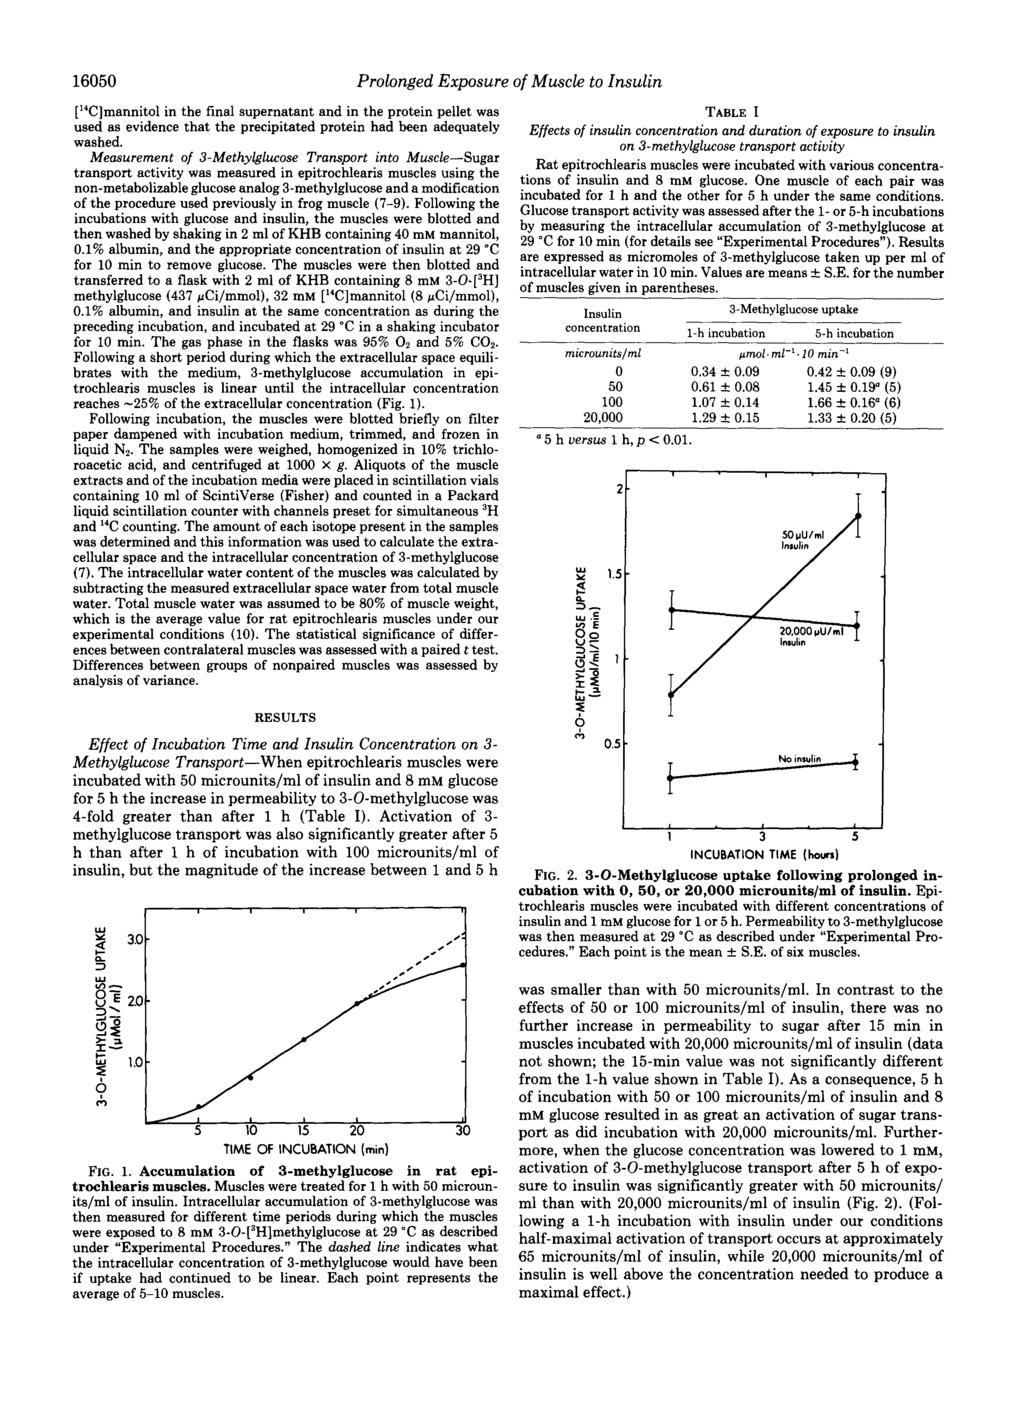 16050 Prolonged Exposure of Muscle to nsulin [14C]mannitol in the final supernatant and in the protein pellet was used as evidence that the precipitated protein had been adequately washed.